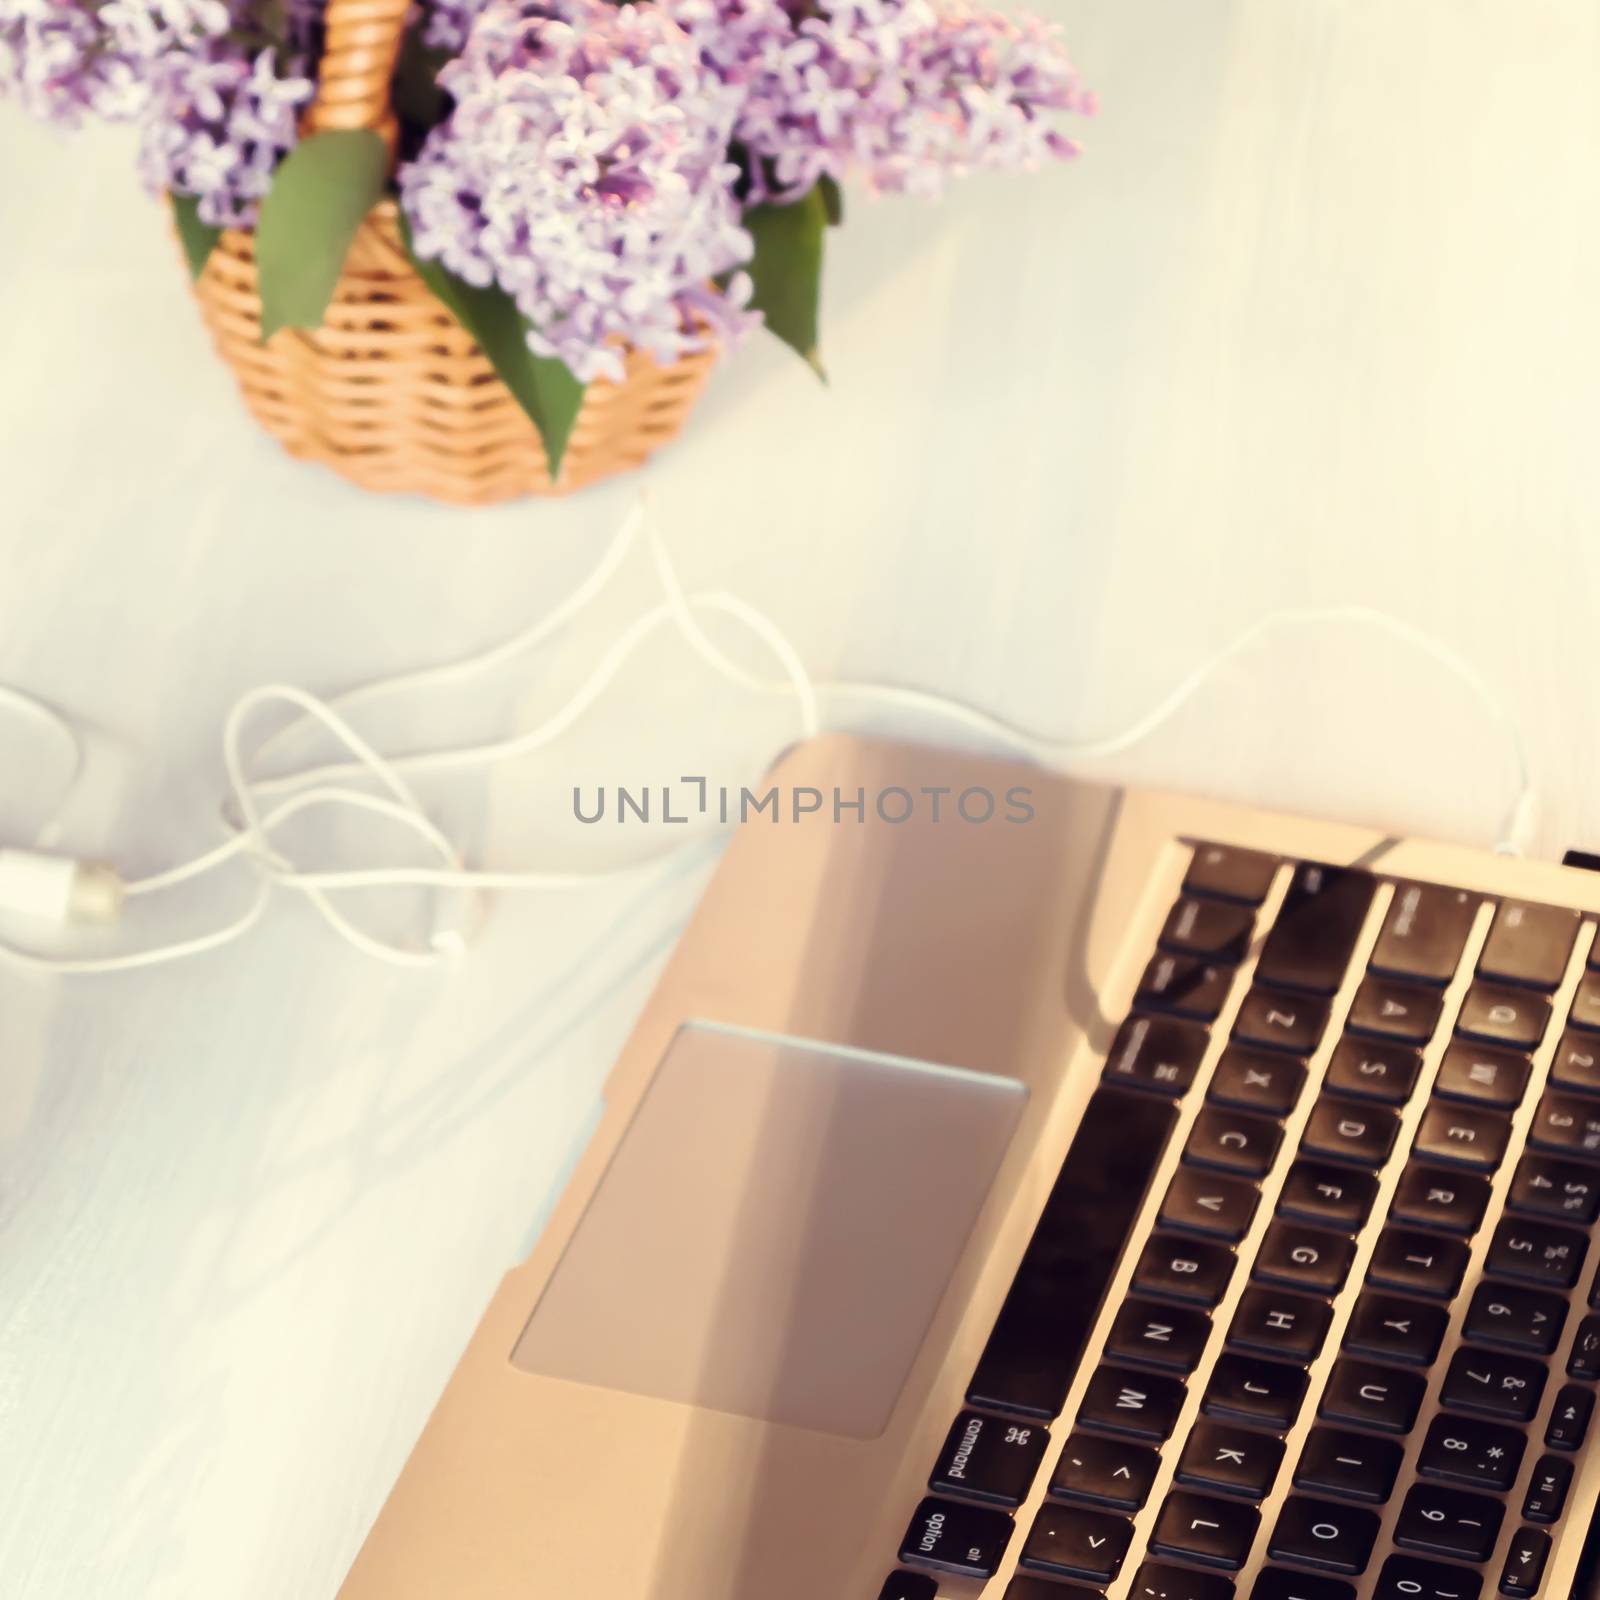 Laptop and a basket of lilac flowers on a white wooden table in the summer terrace - concept of remote work, online business, self-employment.